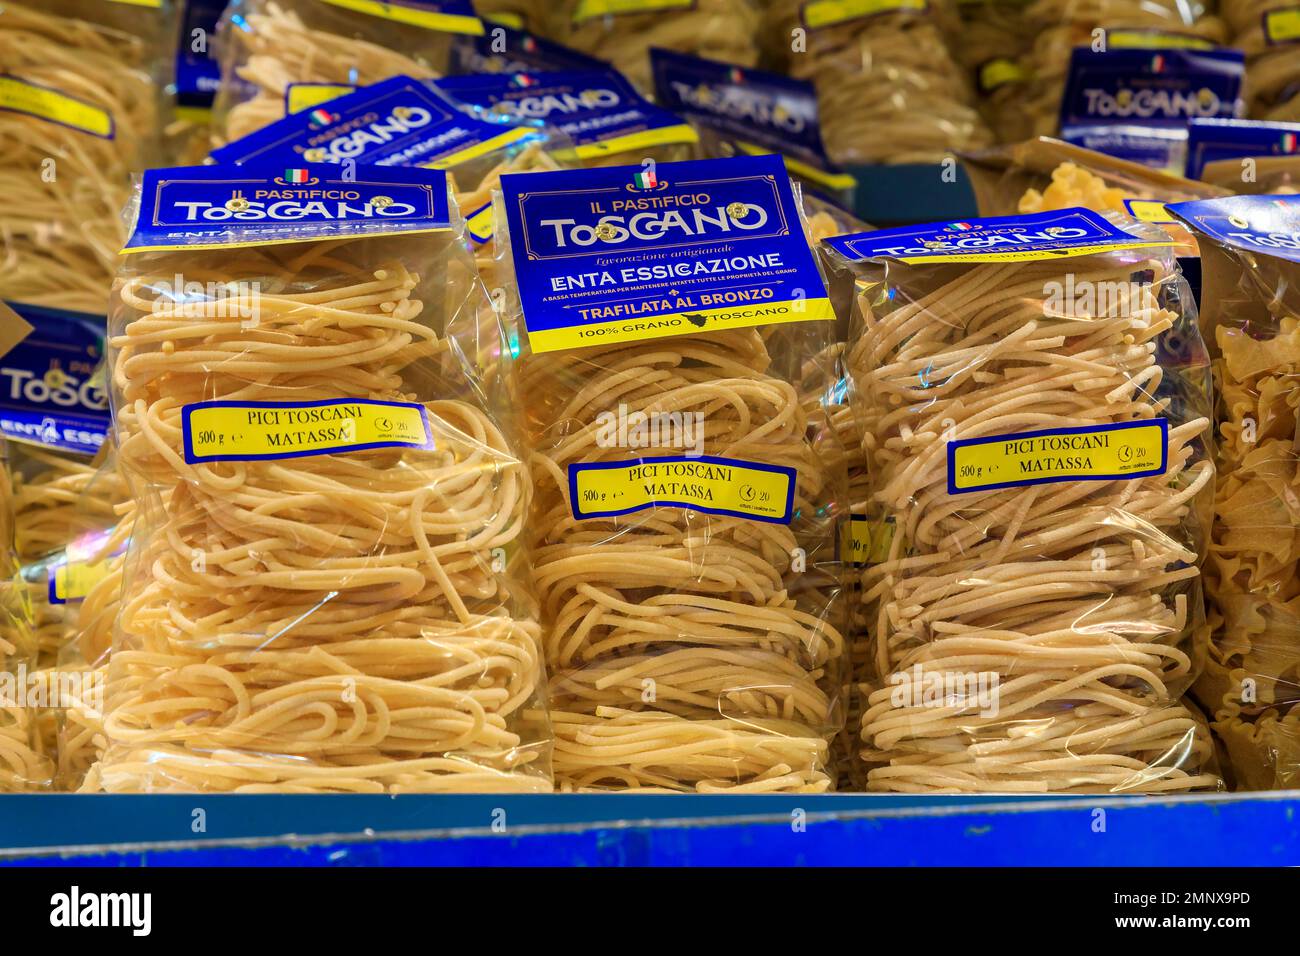 Florence, Italy - June 03, 2022: Dried pici toscani, thick hand rolled Tuscan artisanal pasta on display at a shop in Central Market Mercato Centrale Stock Photo